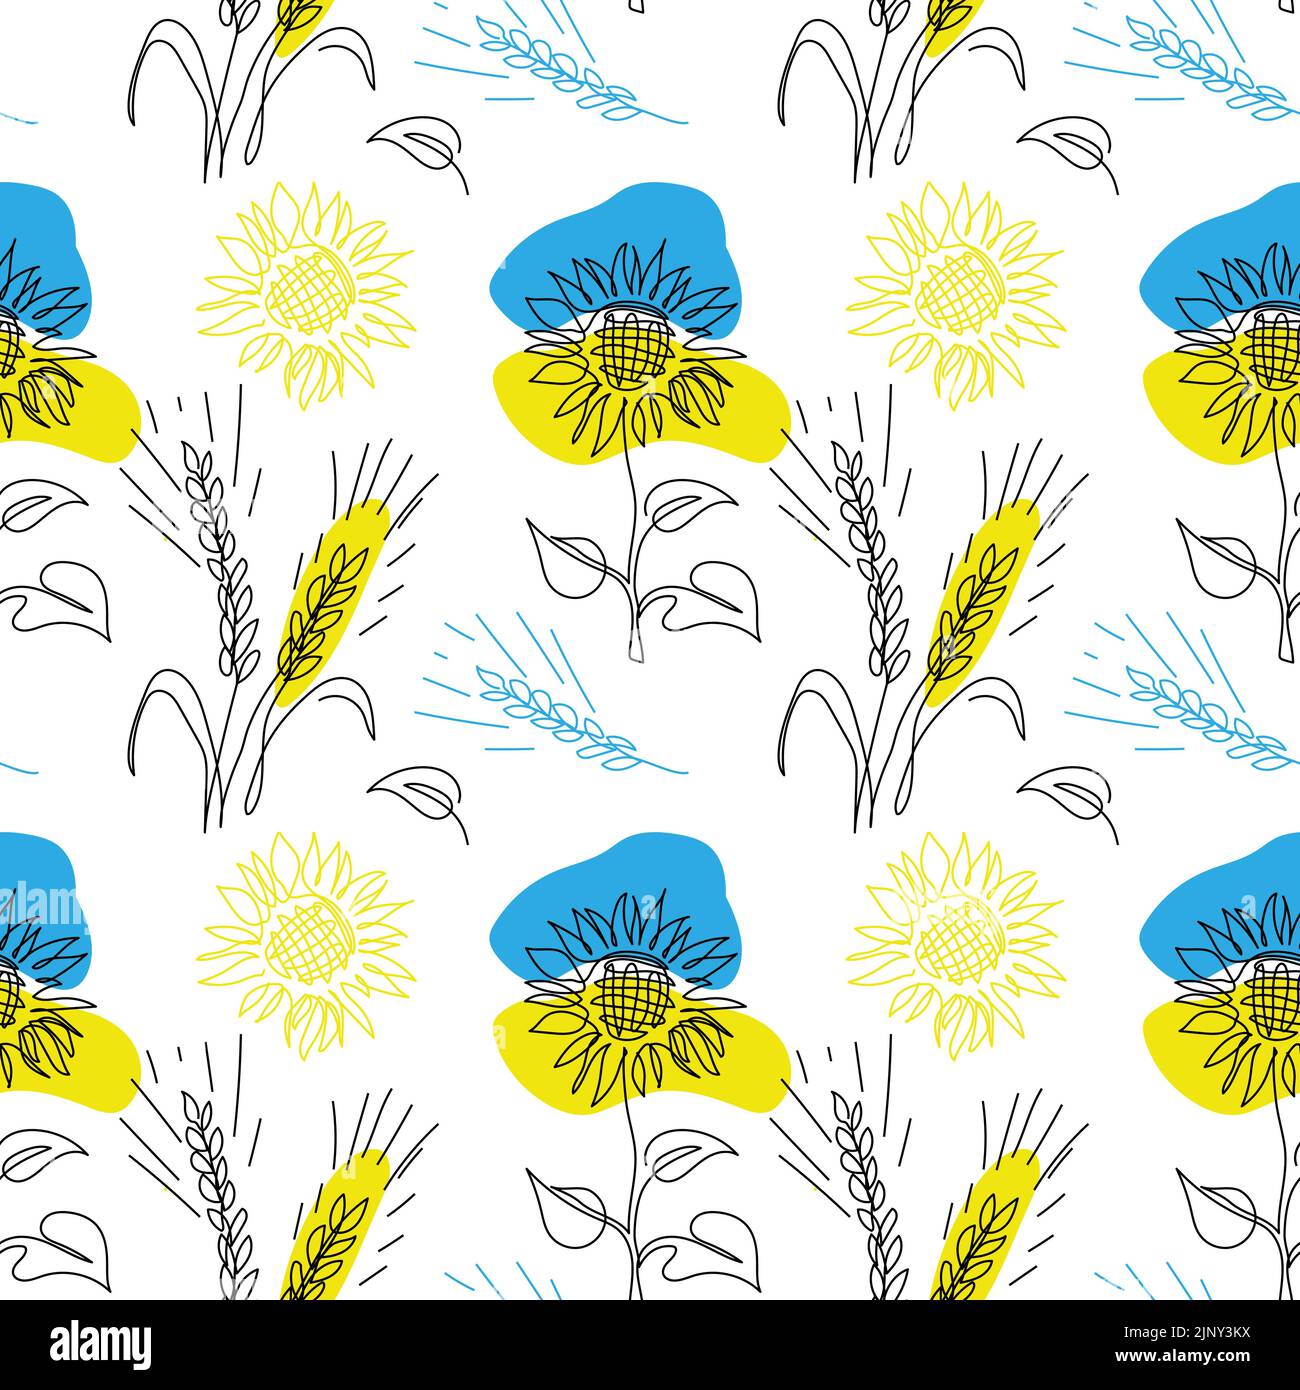 Sunflowers and wheat spikelet vector pattern on white background. One continuous line art drawing. Blue and yellow colors of Ukrainian flag Stock Vector